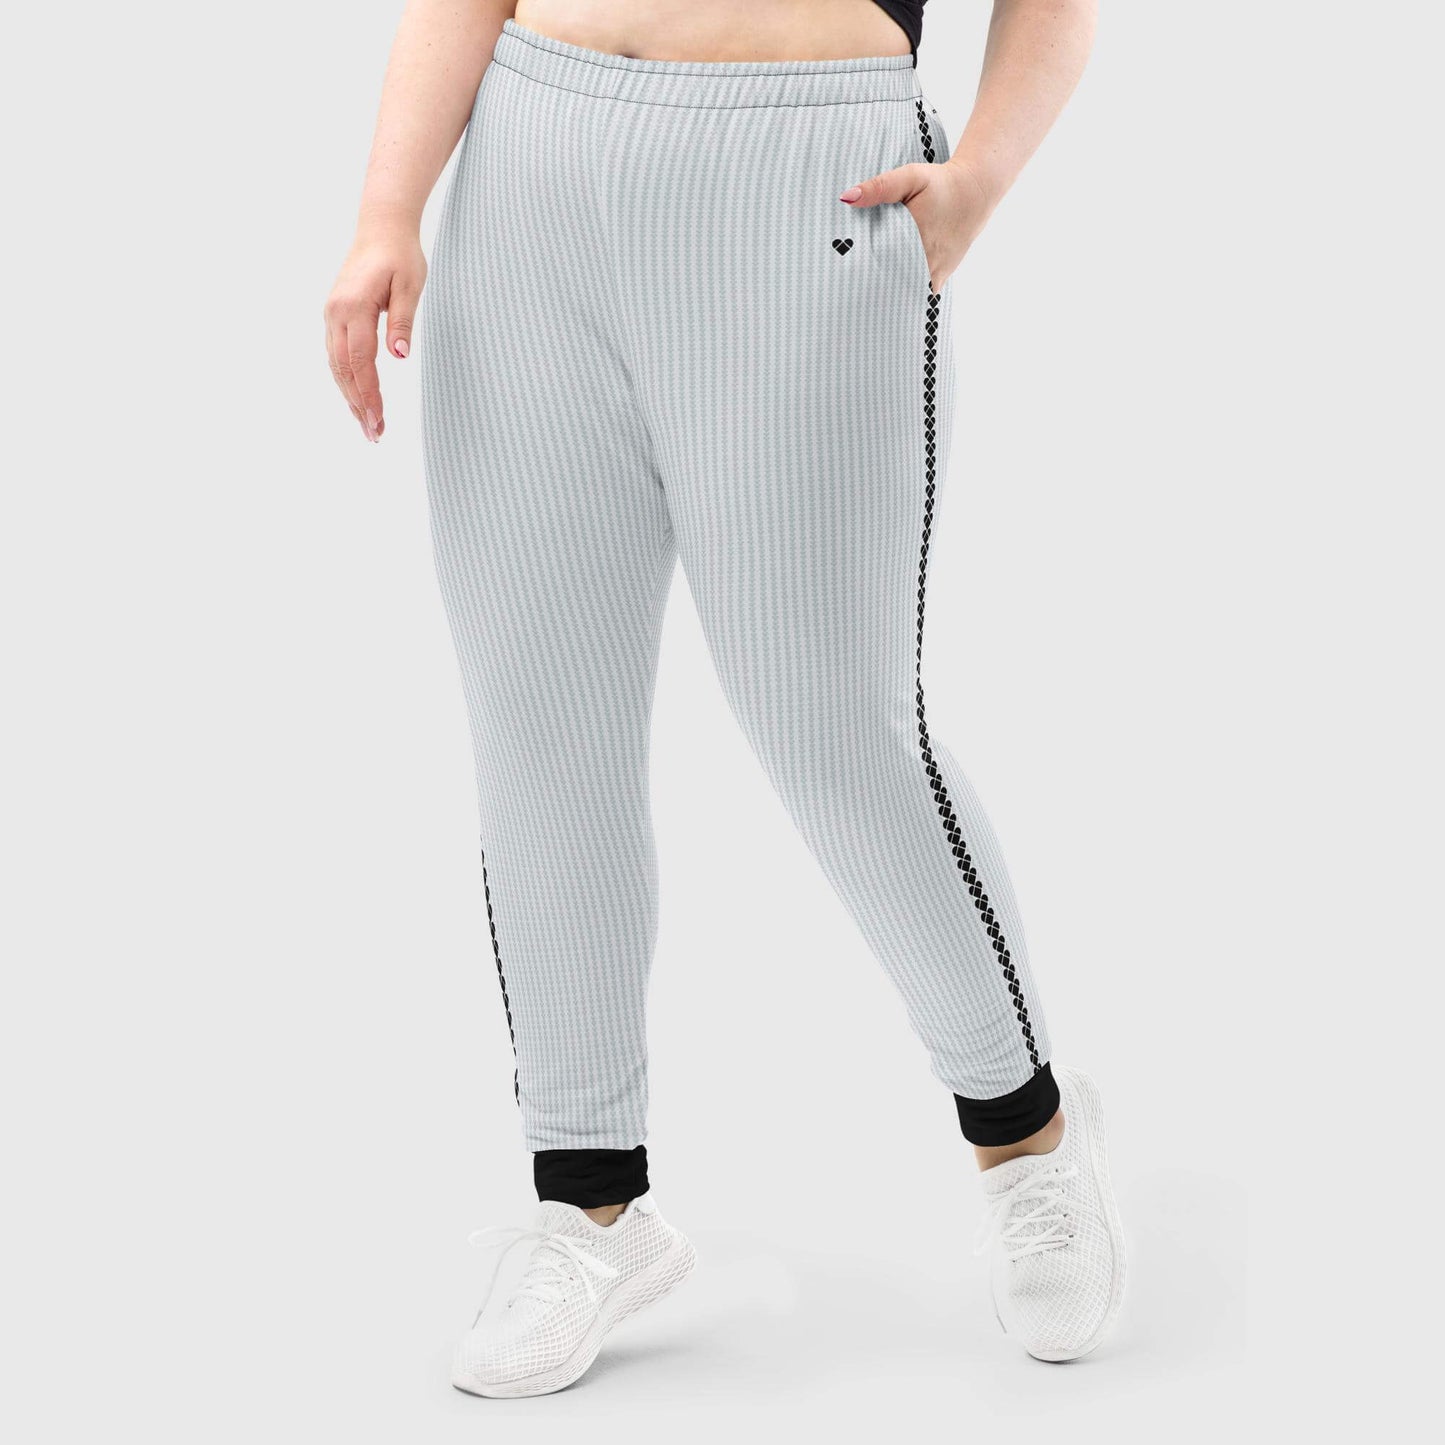 Chill-wear Lovogram joggers for women with a brand heart logo